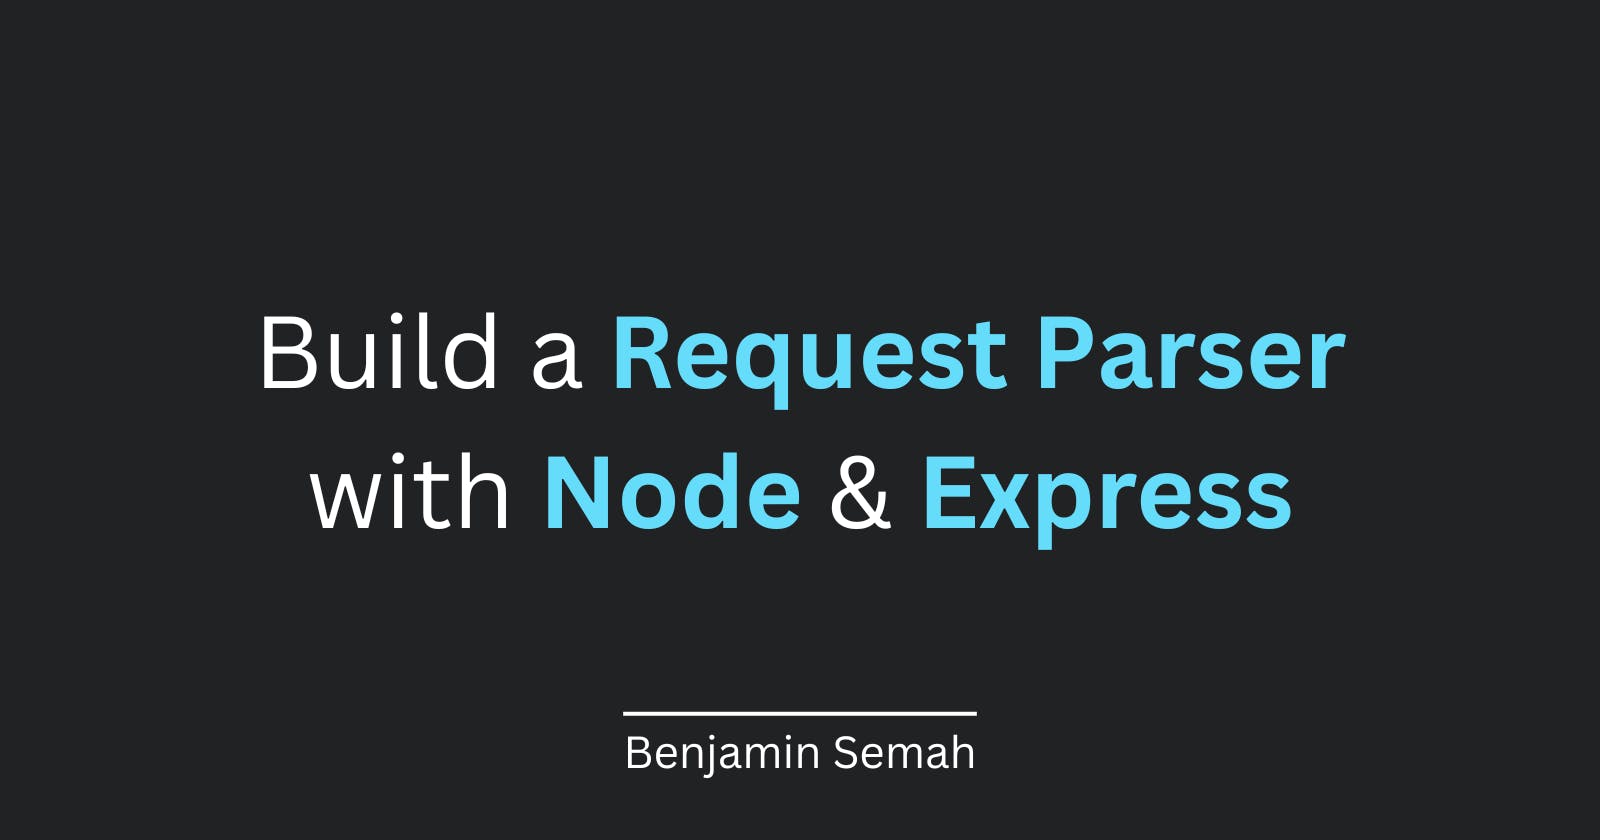 Build a Request Parser with Node and Express